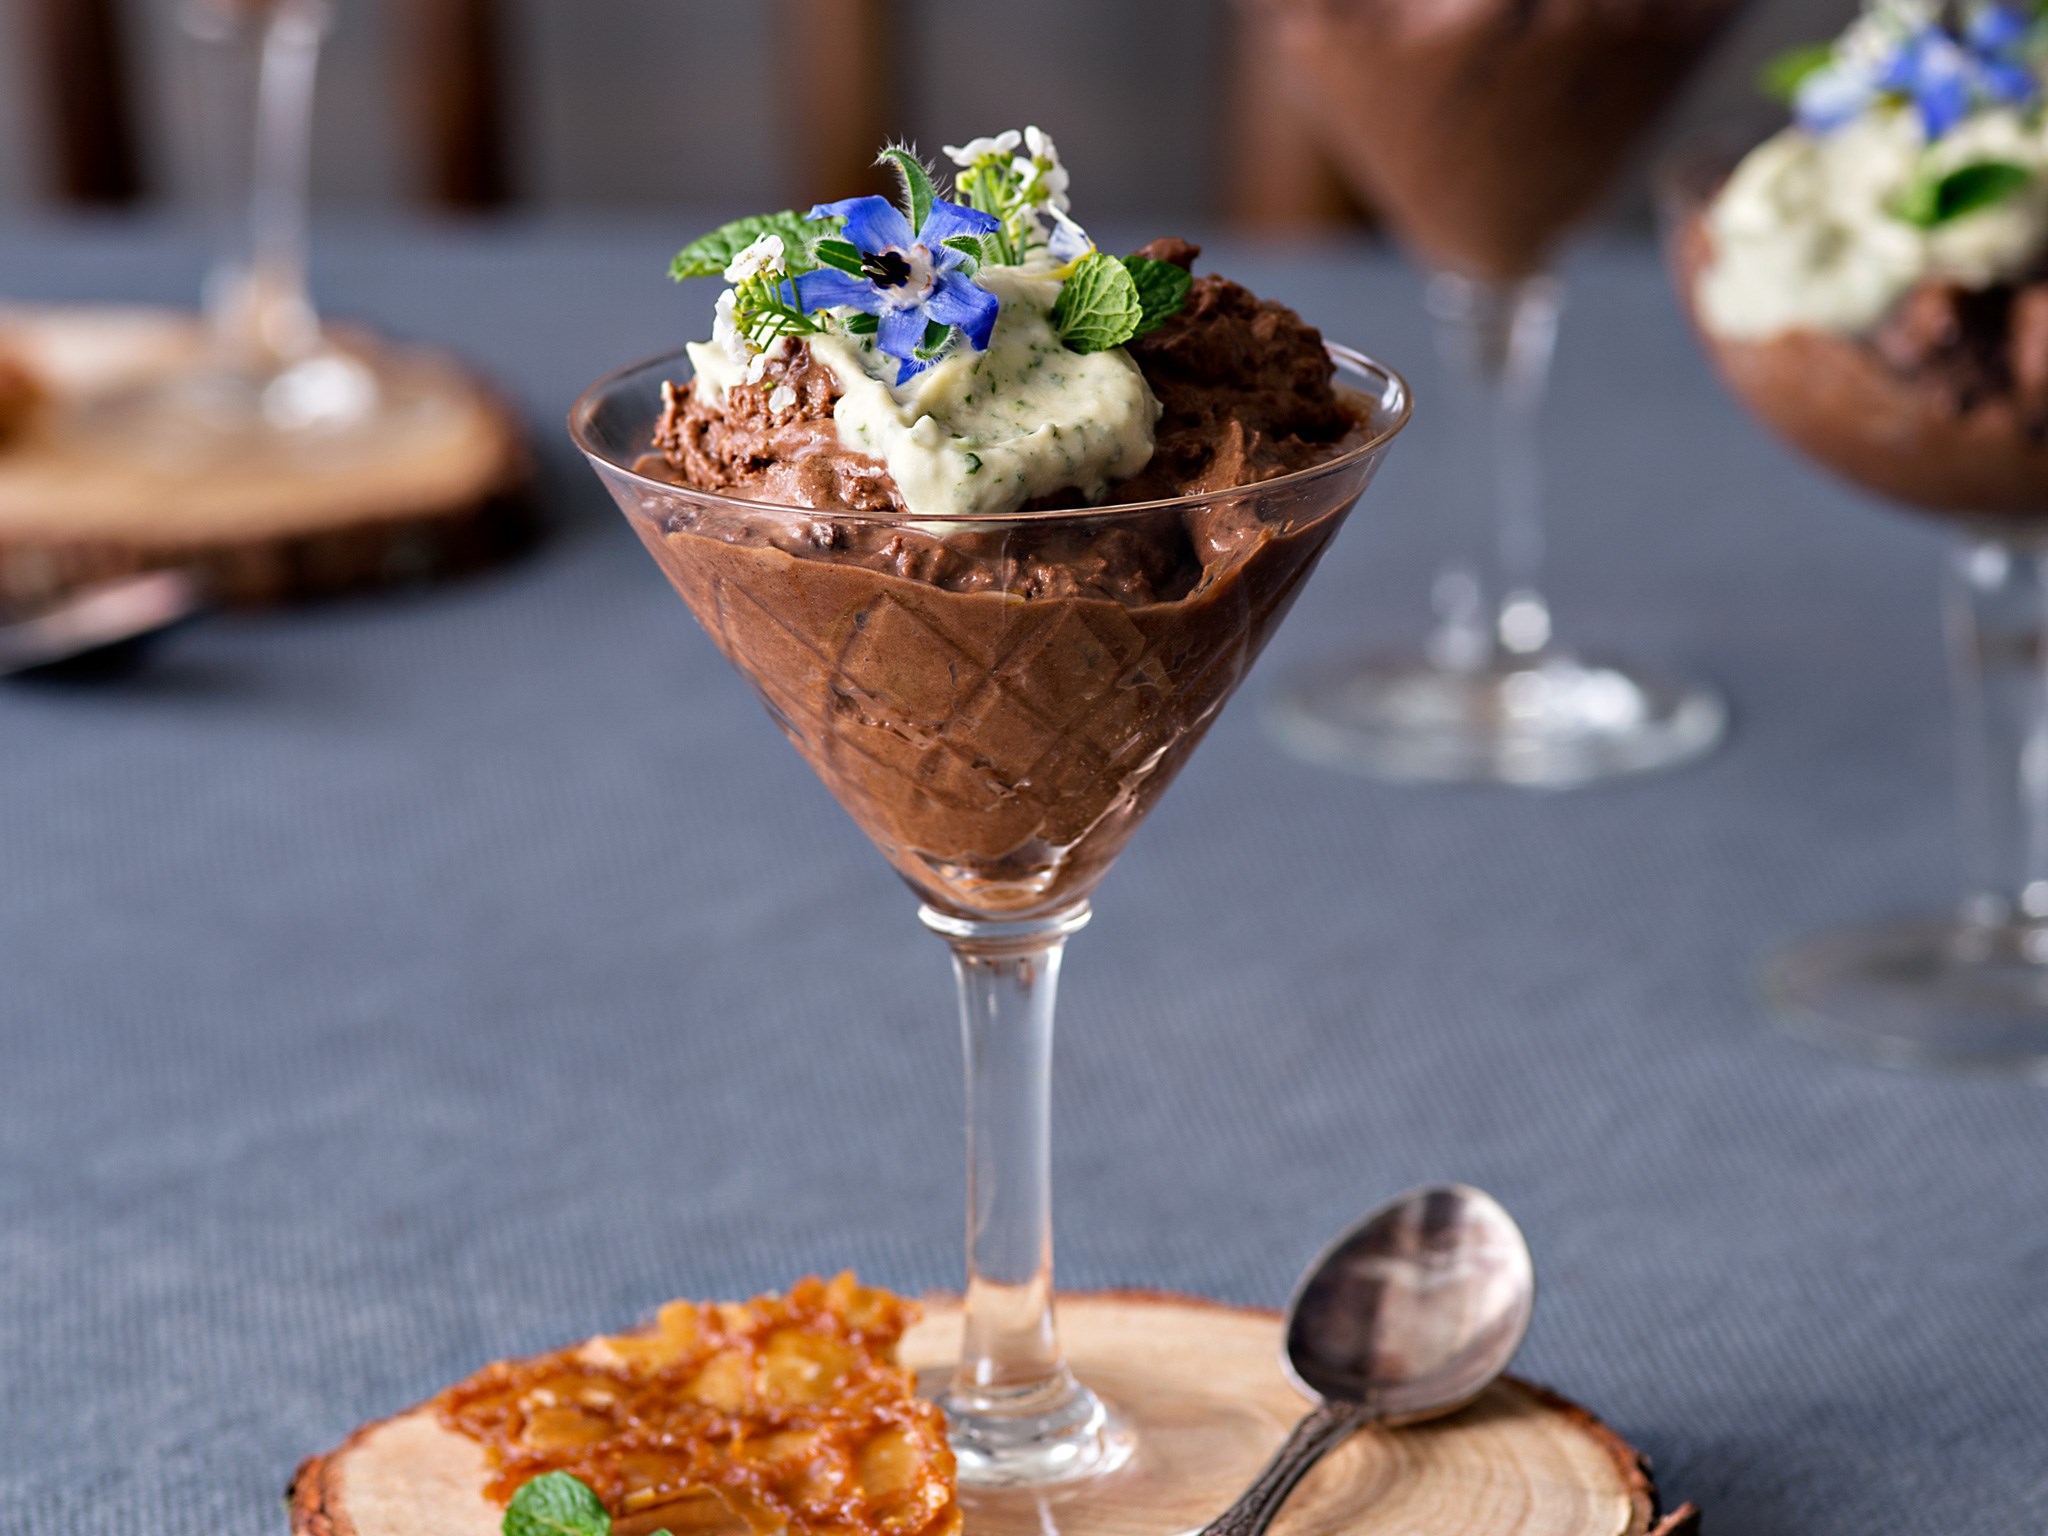 Mousse au chocolat with fresh mint cream recipe | Food To Love